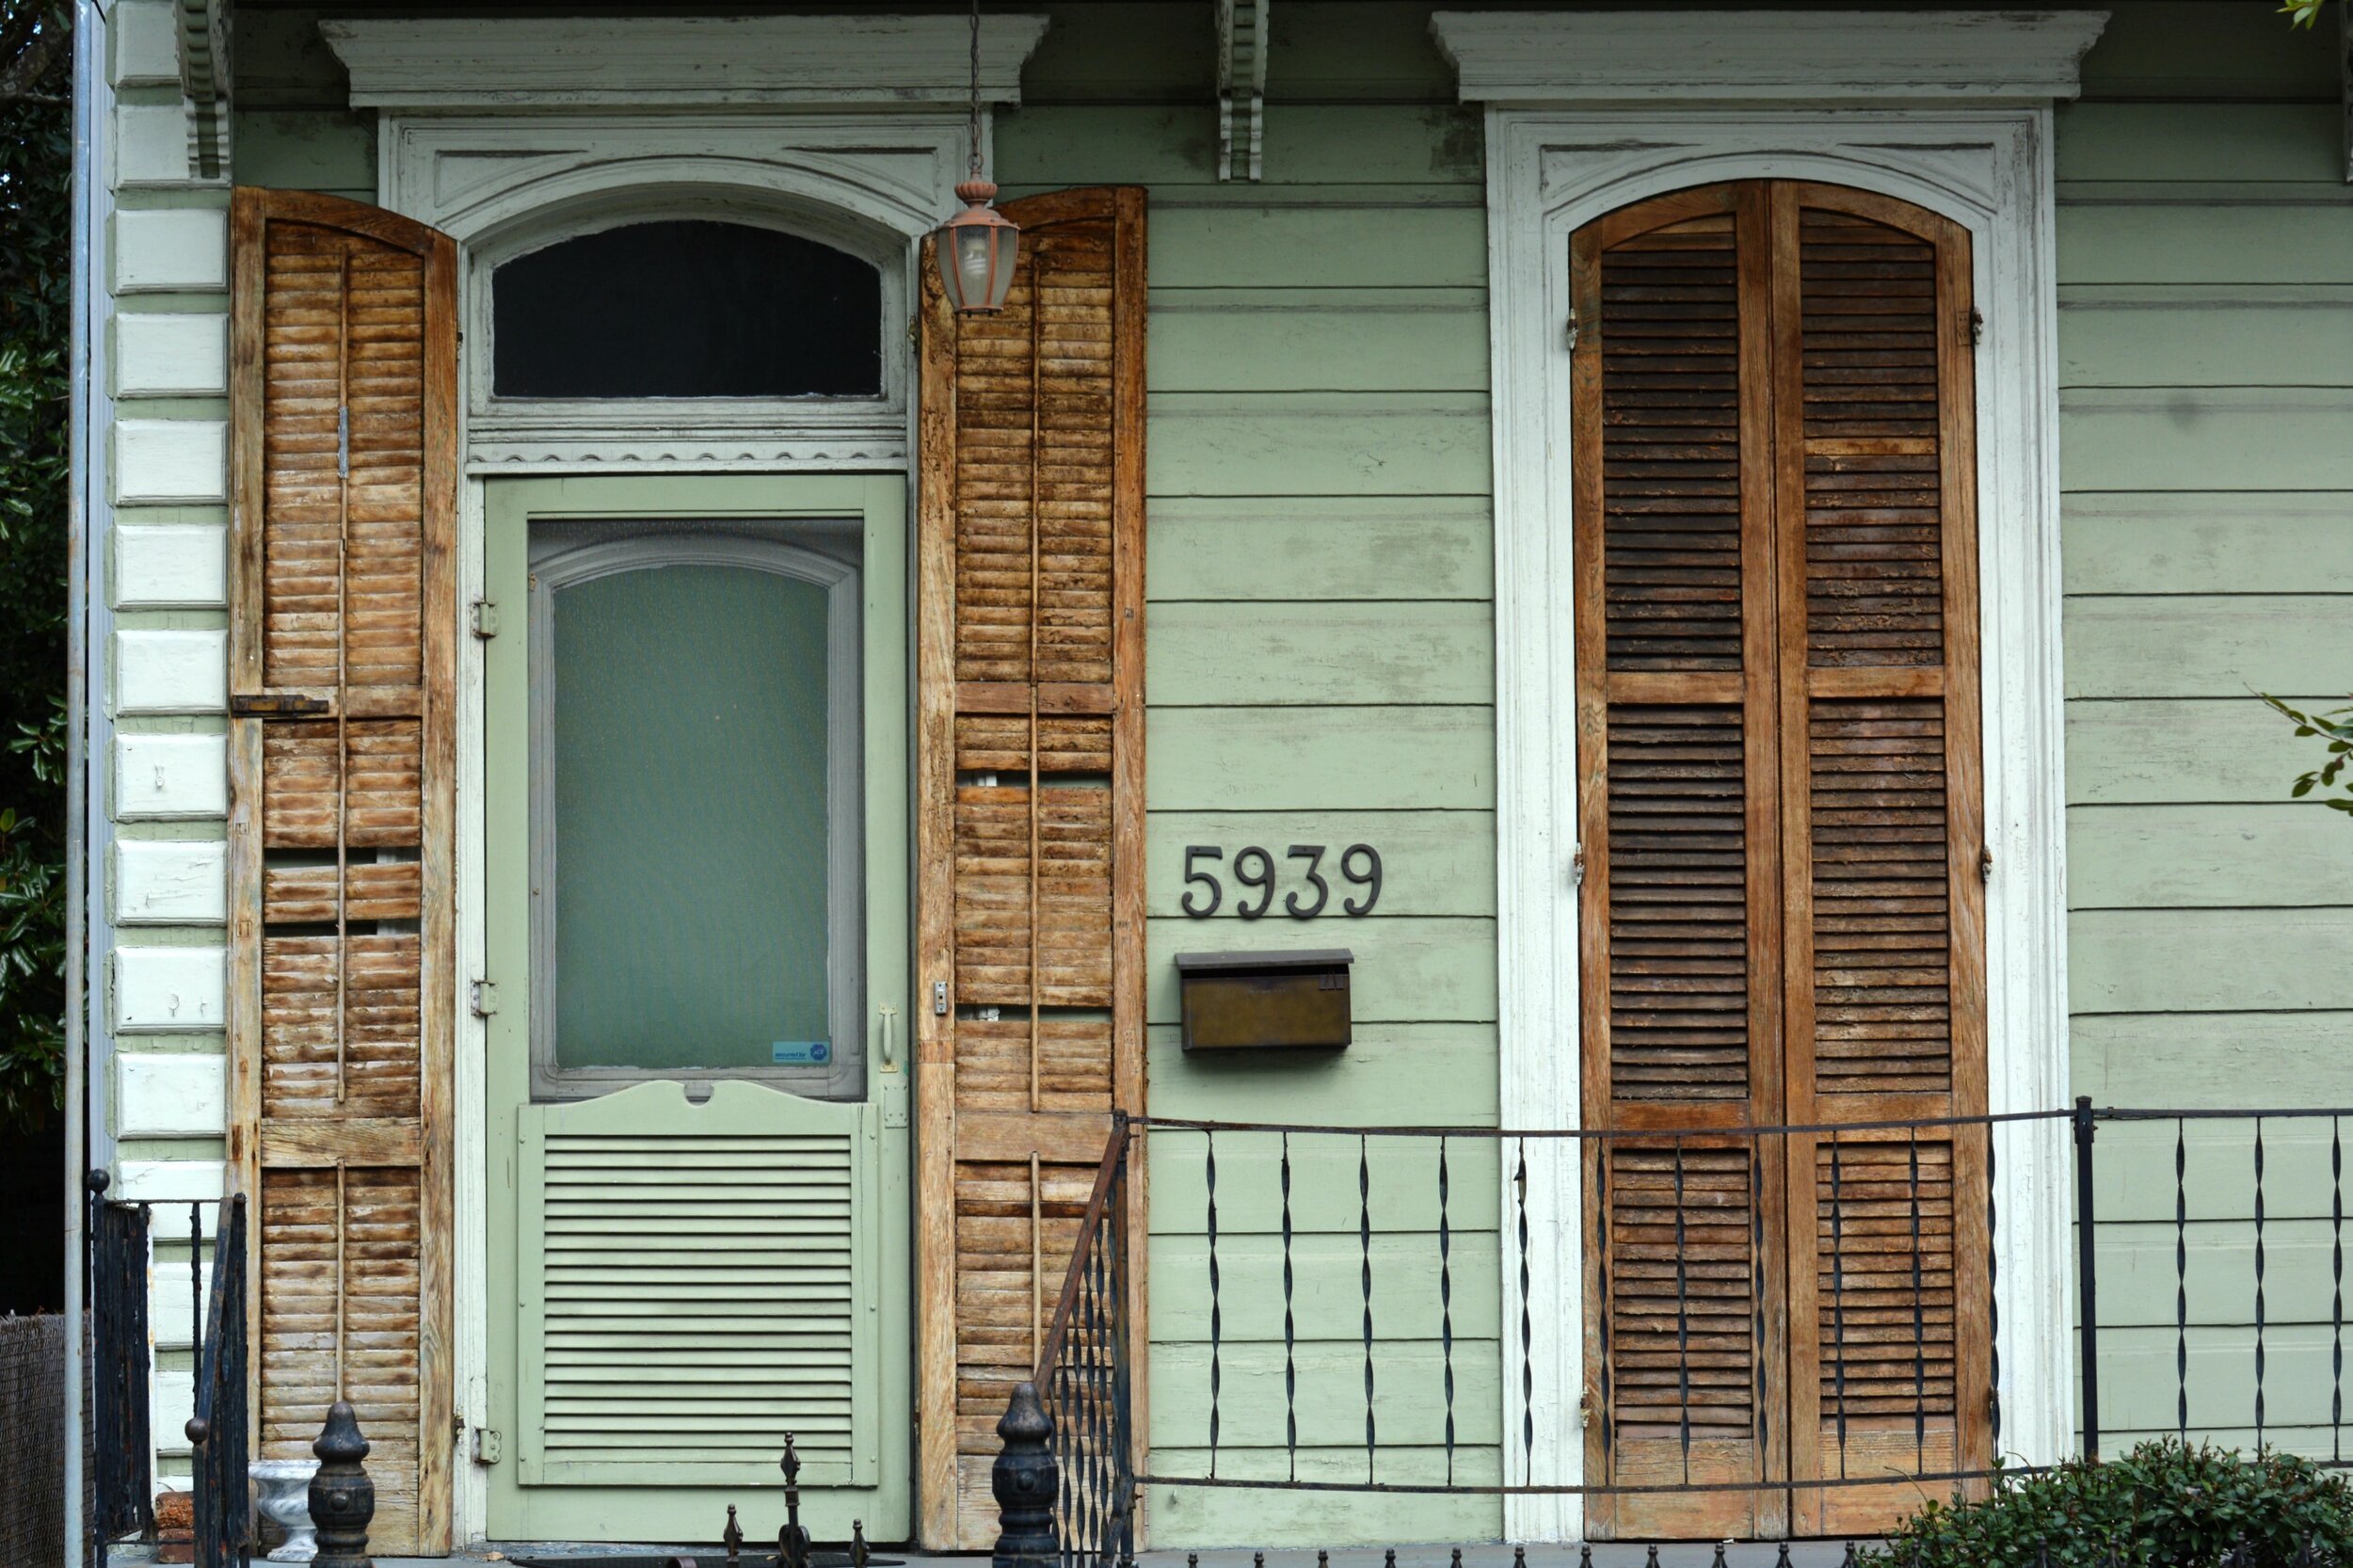 New Orleans - Mint Green House Brown Distressed Shutters.jpg